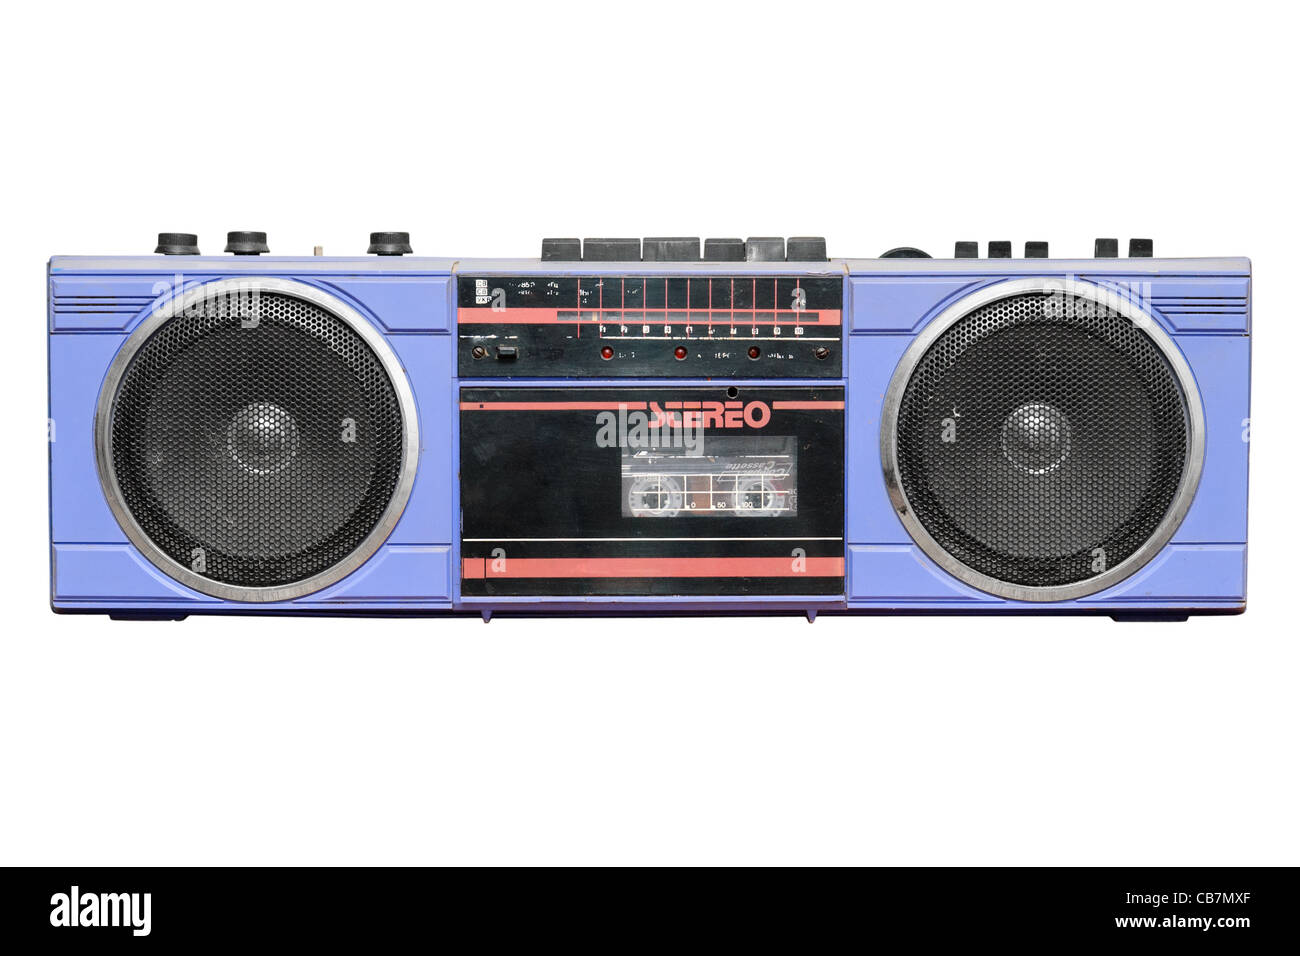 Old vintage stereo cassette/radio recorder. Isolated on white background with clipping path. Stock Photo